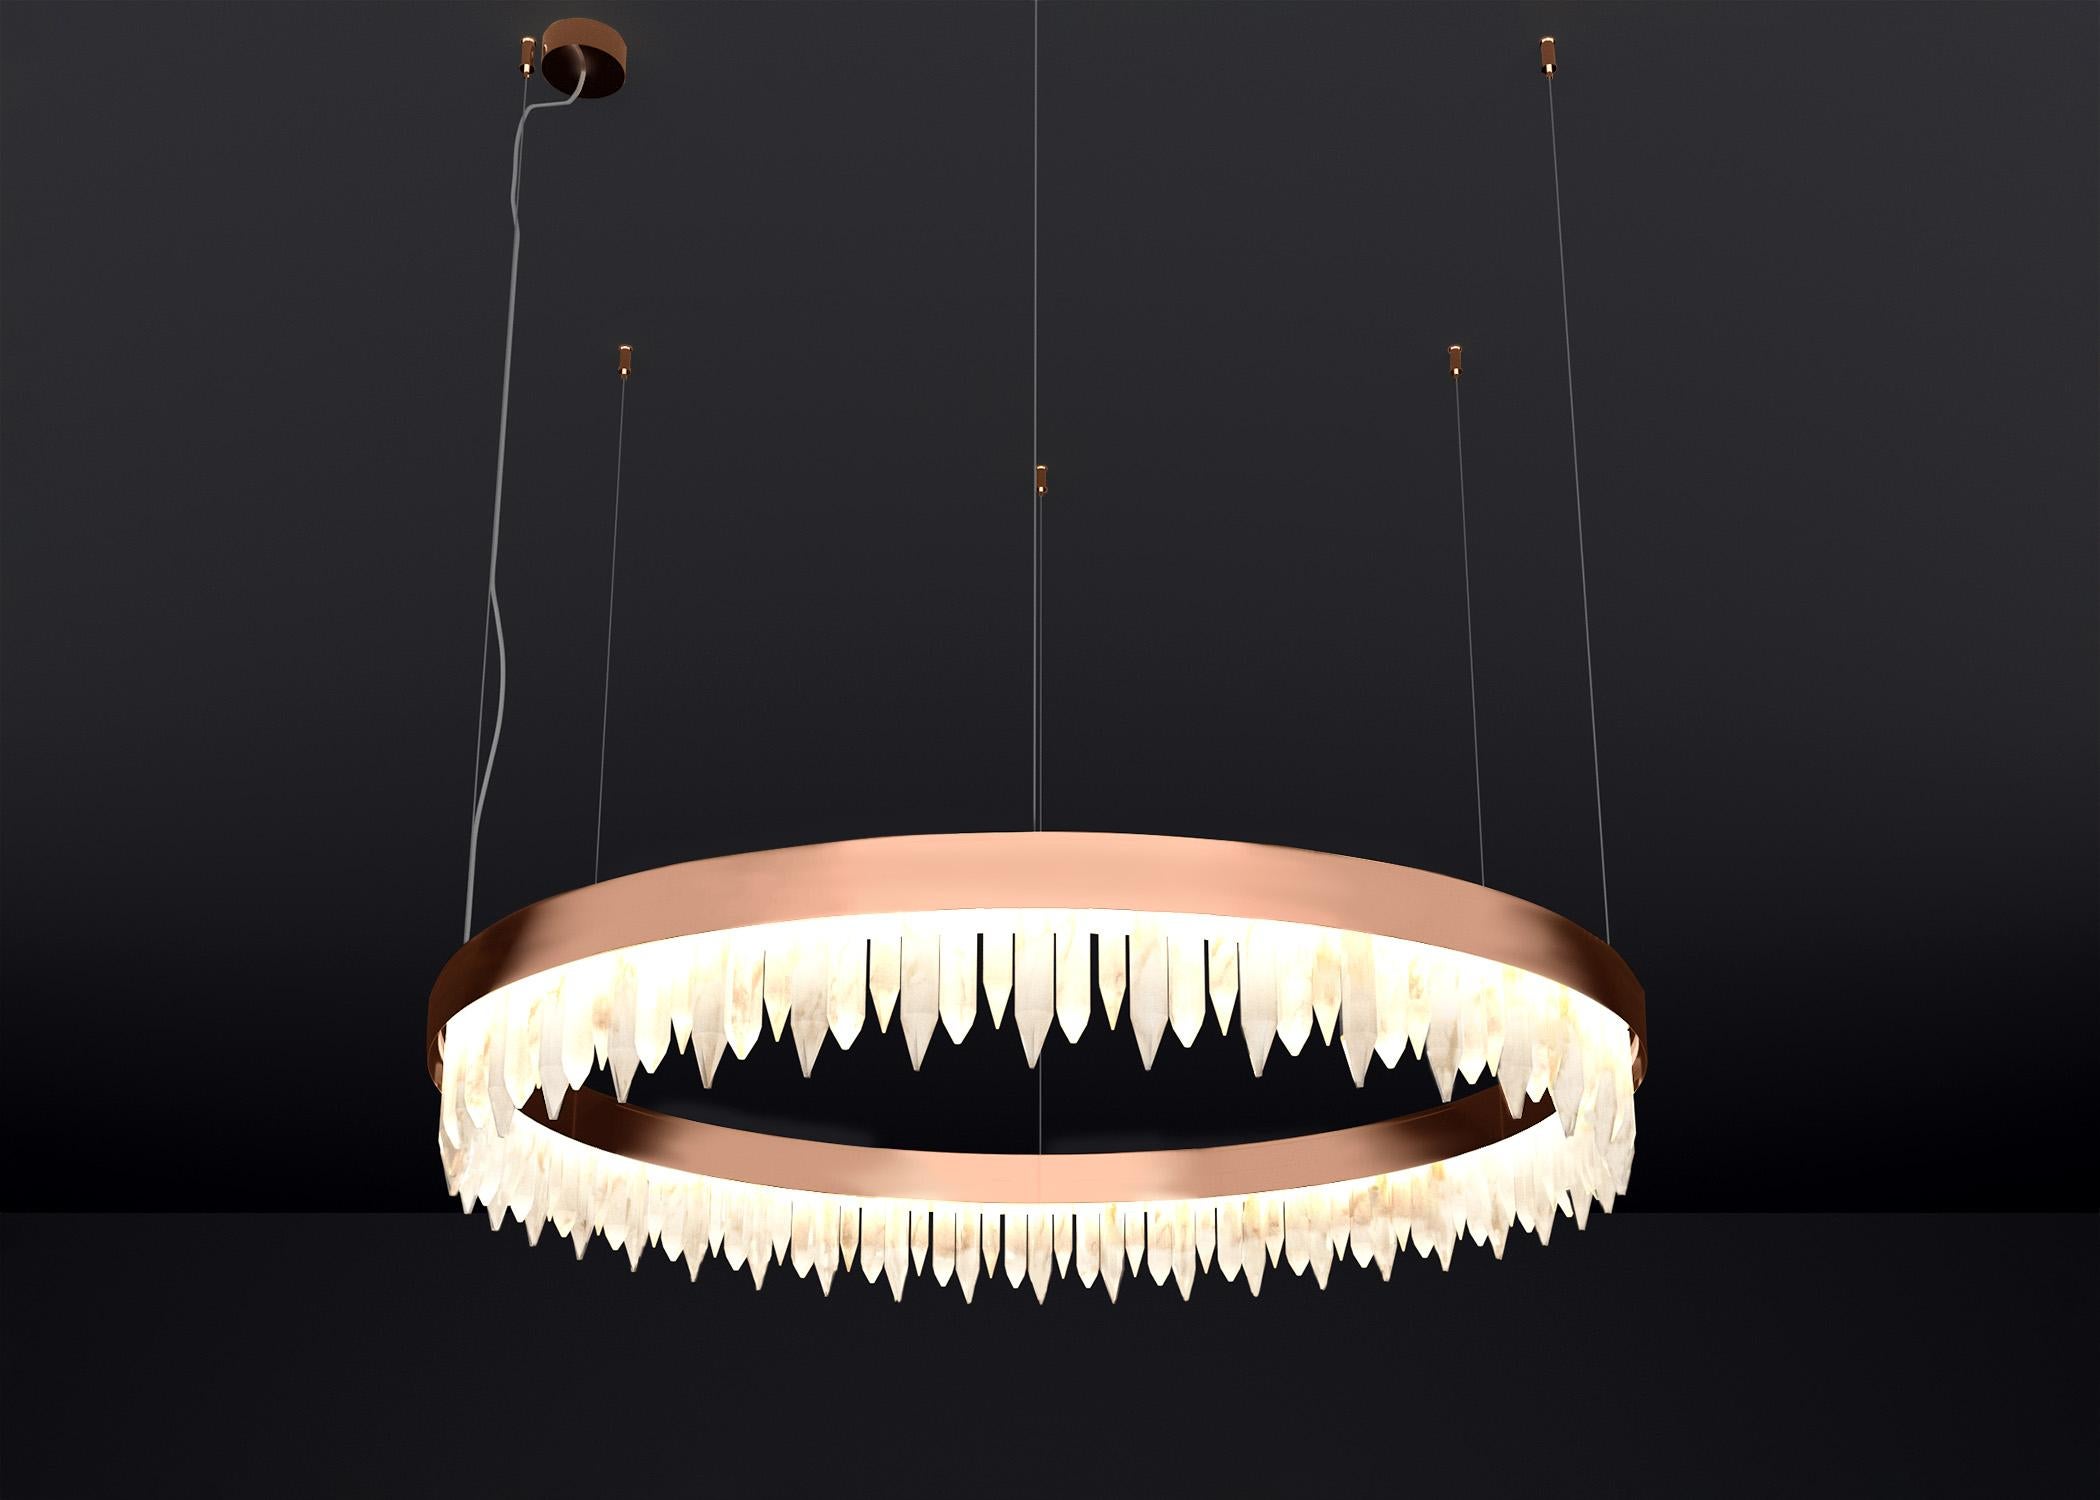 Urano Copper 80 Pendant Light 1 by Alabastro Italiano
Dimensions: Ø 80 x H 20 cm.
Materials: Glass and copper.

2 x Strip LED, 108 Watt 10843 Lumen, 24 V, 3000 K.

Available in different sizes: Ø 60, Ø 80, Ø 100 and Ø 120 cm. 
Available in